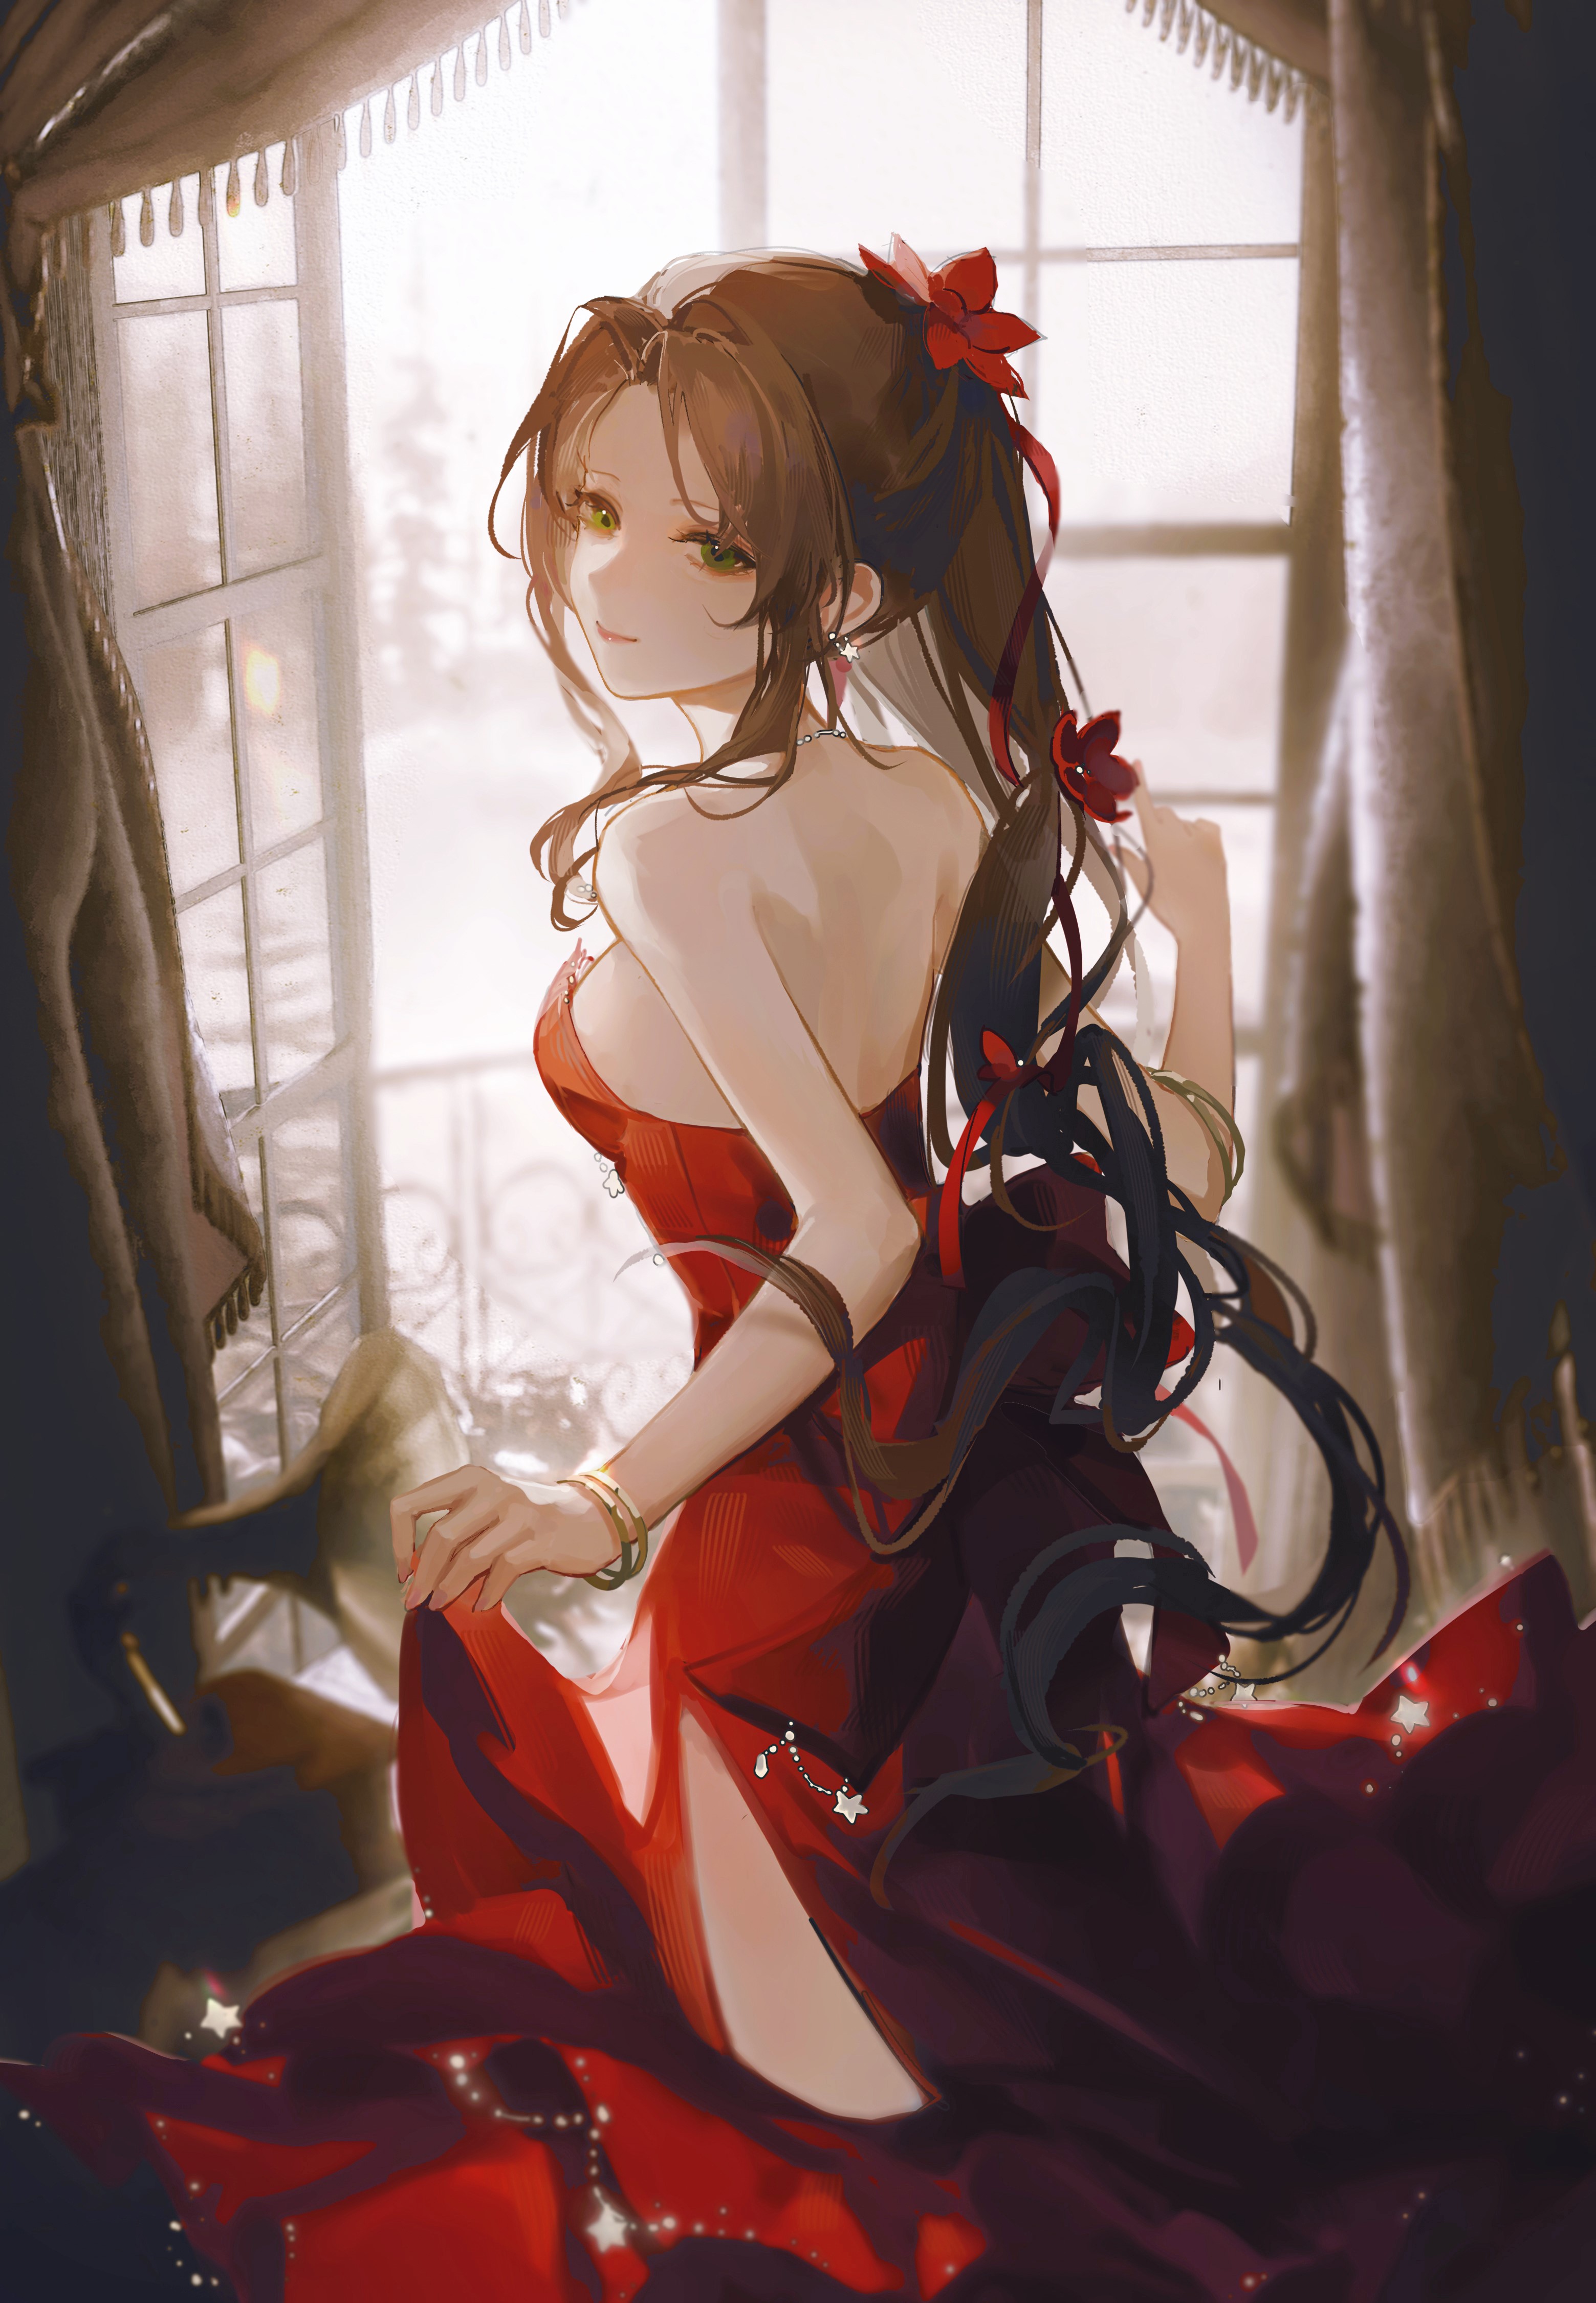 Anime 3119x4500 anime anime girls Aerith Gainsborough dress Final Fantasy VII window indoors women indoors long hair closed mouth smiling looking at viewer bareback lifting dress bracelets brunette blue eyes earring video game characters flower in hair looking back video game girls sunlight red dress